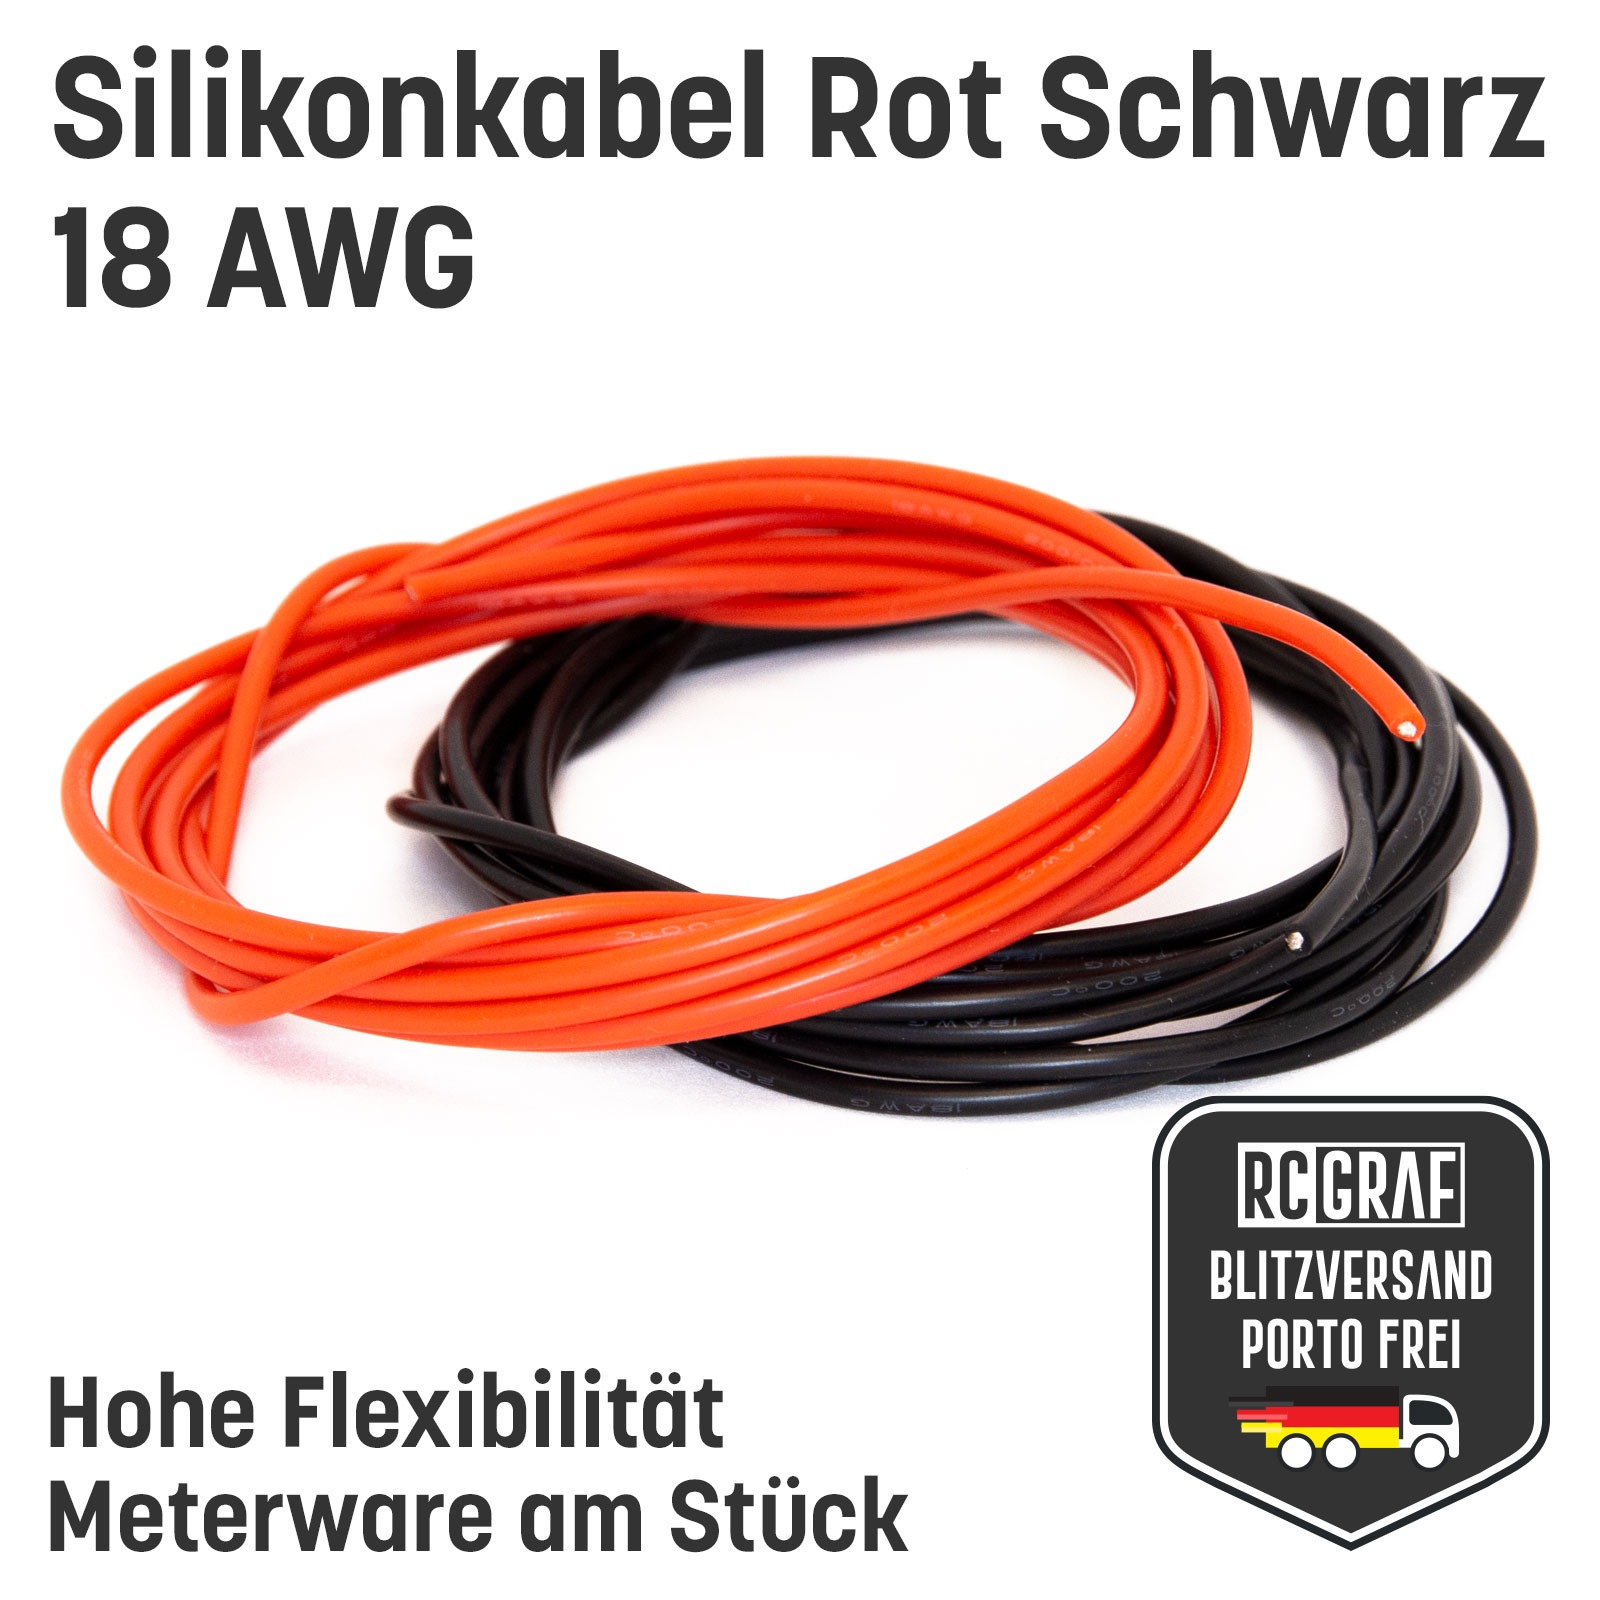 Silicone Cable 18 AWG High Flex Red Black Copper RC Cable